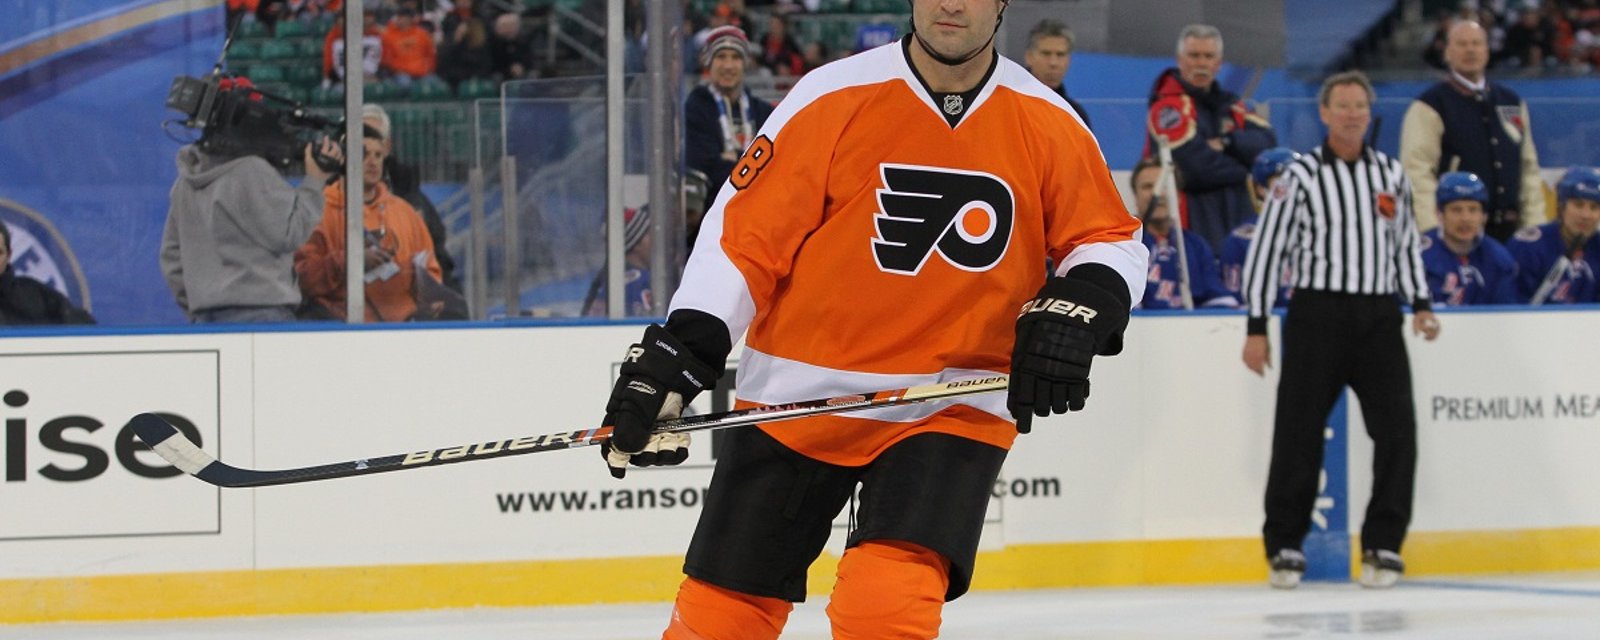 Report: Former Flyers general manager offered Eric Lindros an NHL comeback.